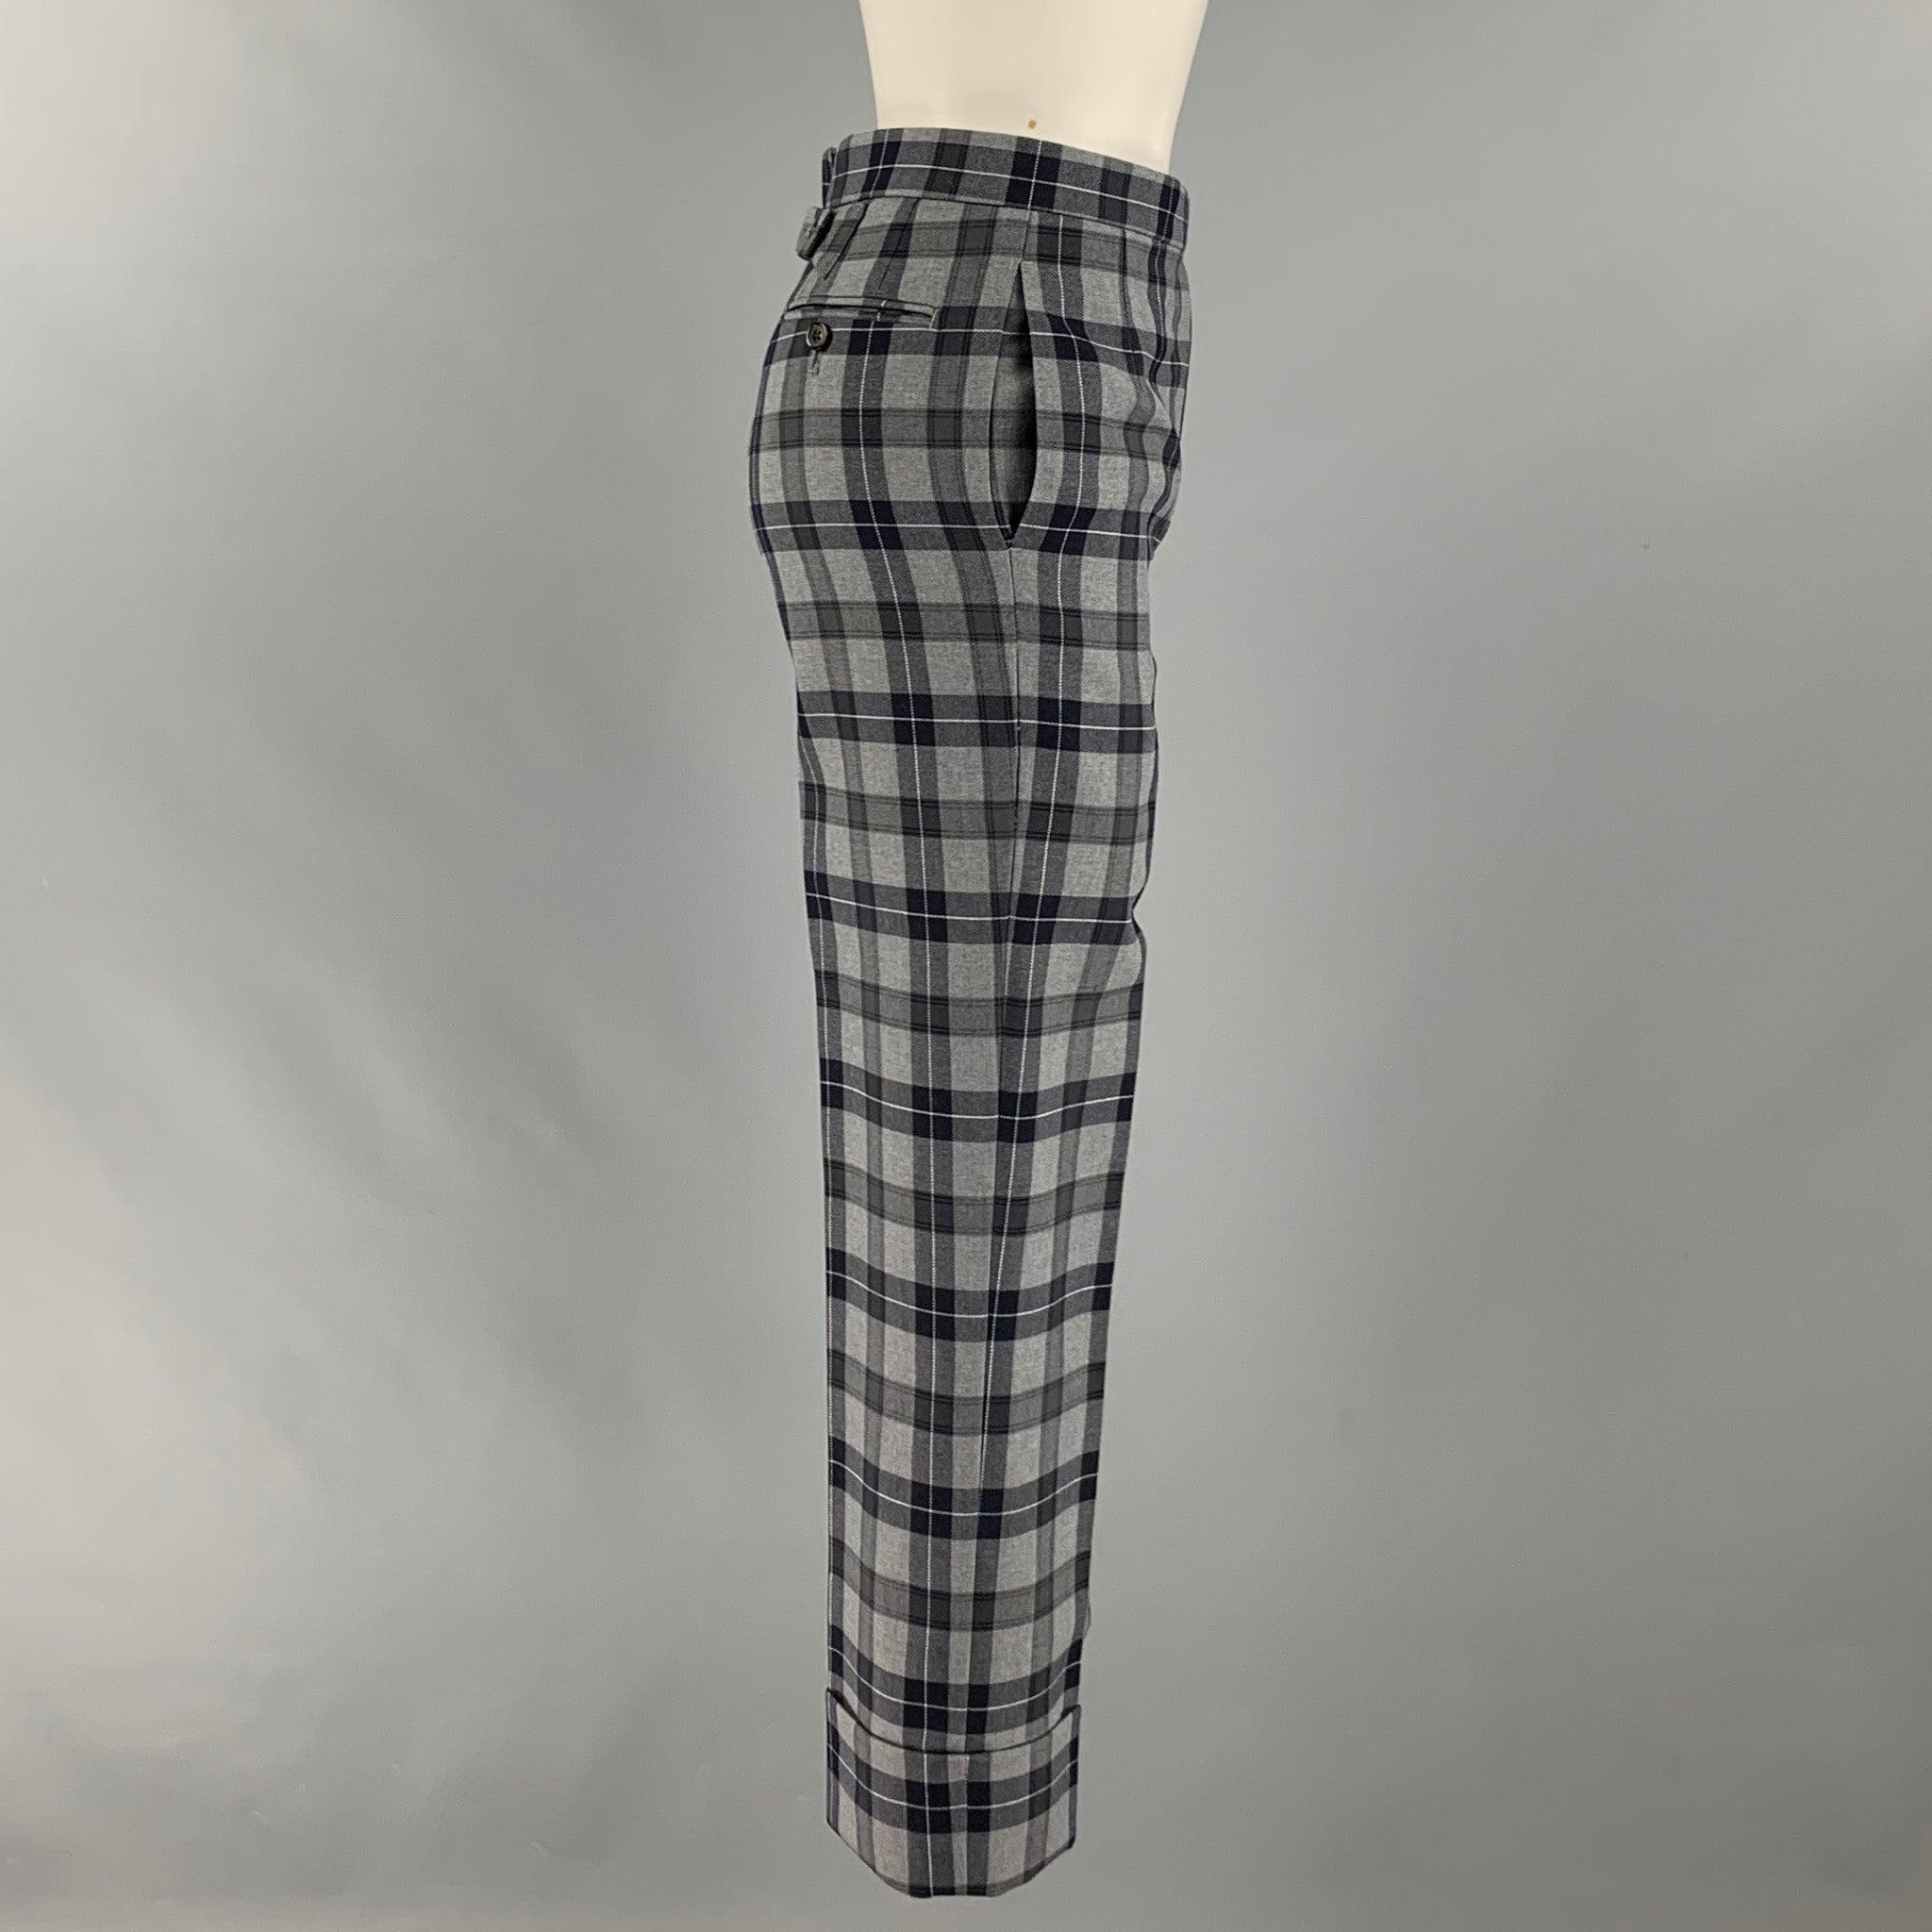 THOM BROWNE dress pants comes in a grey and black plaid wool twill featuring a high waist, cuffed leg, front tab, and a button fly closure. Made in Italy.Excellent Pre-Owned Condition. 

Marked:   00 

Measurements: 
  Waist: 28 inches Rise: 11